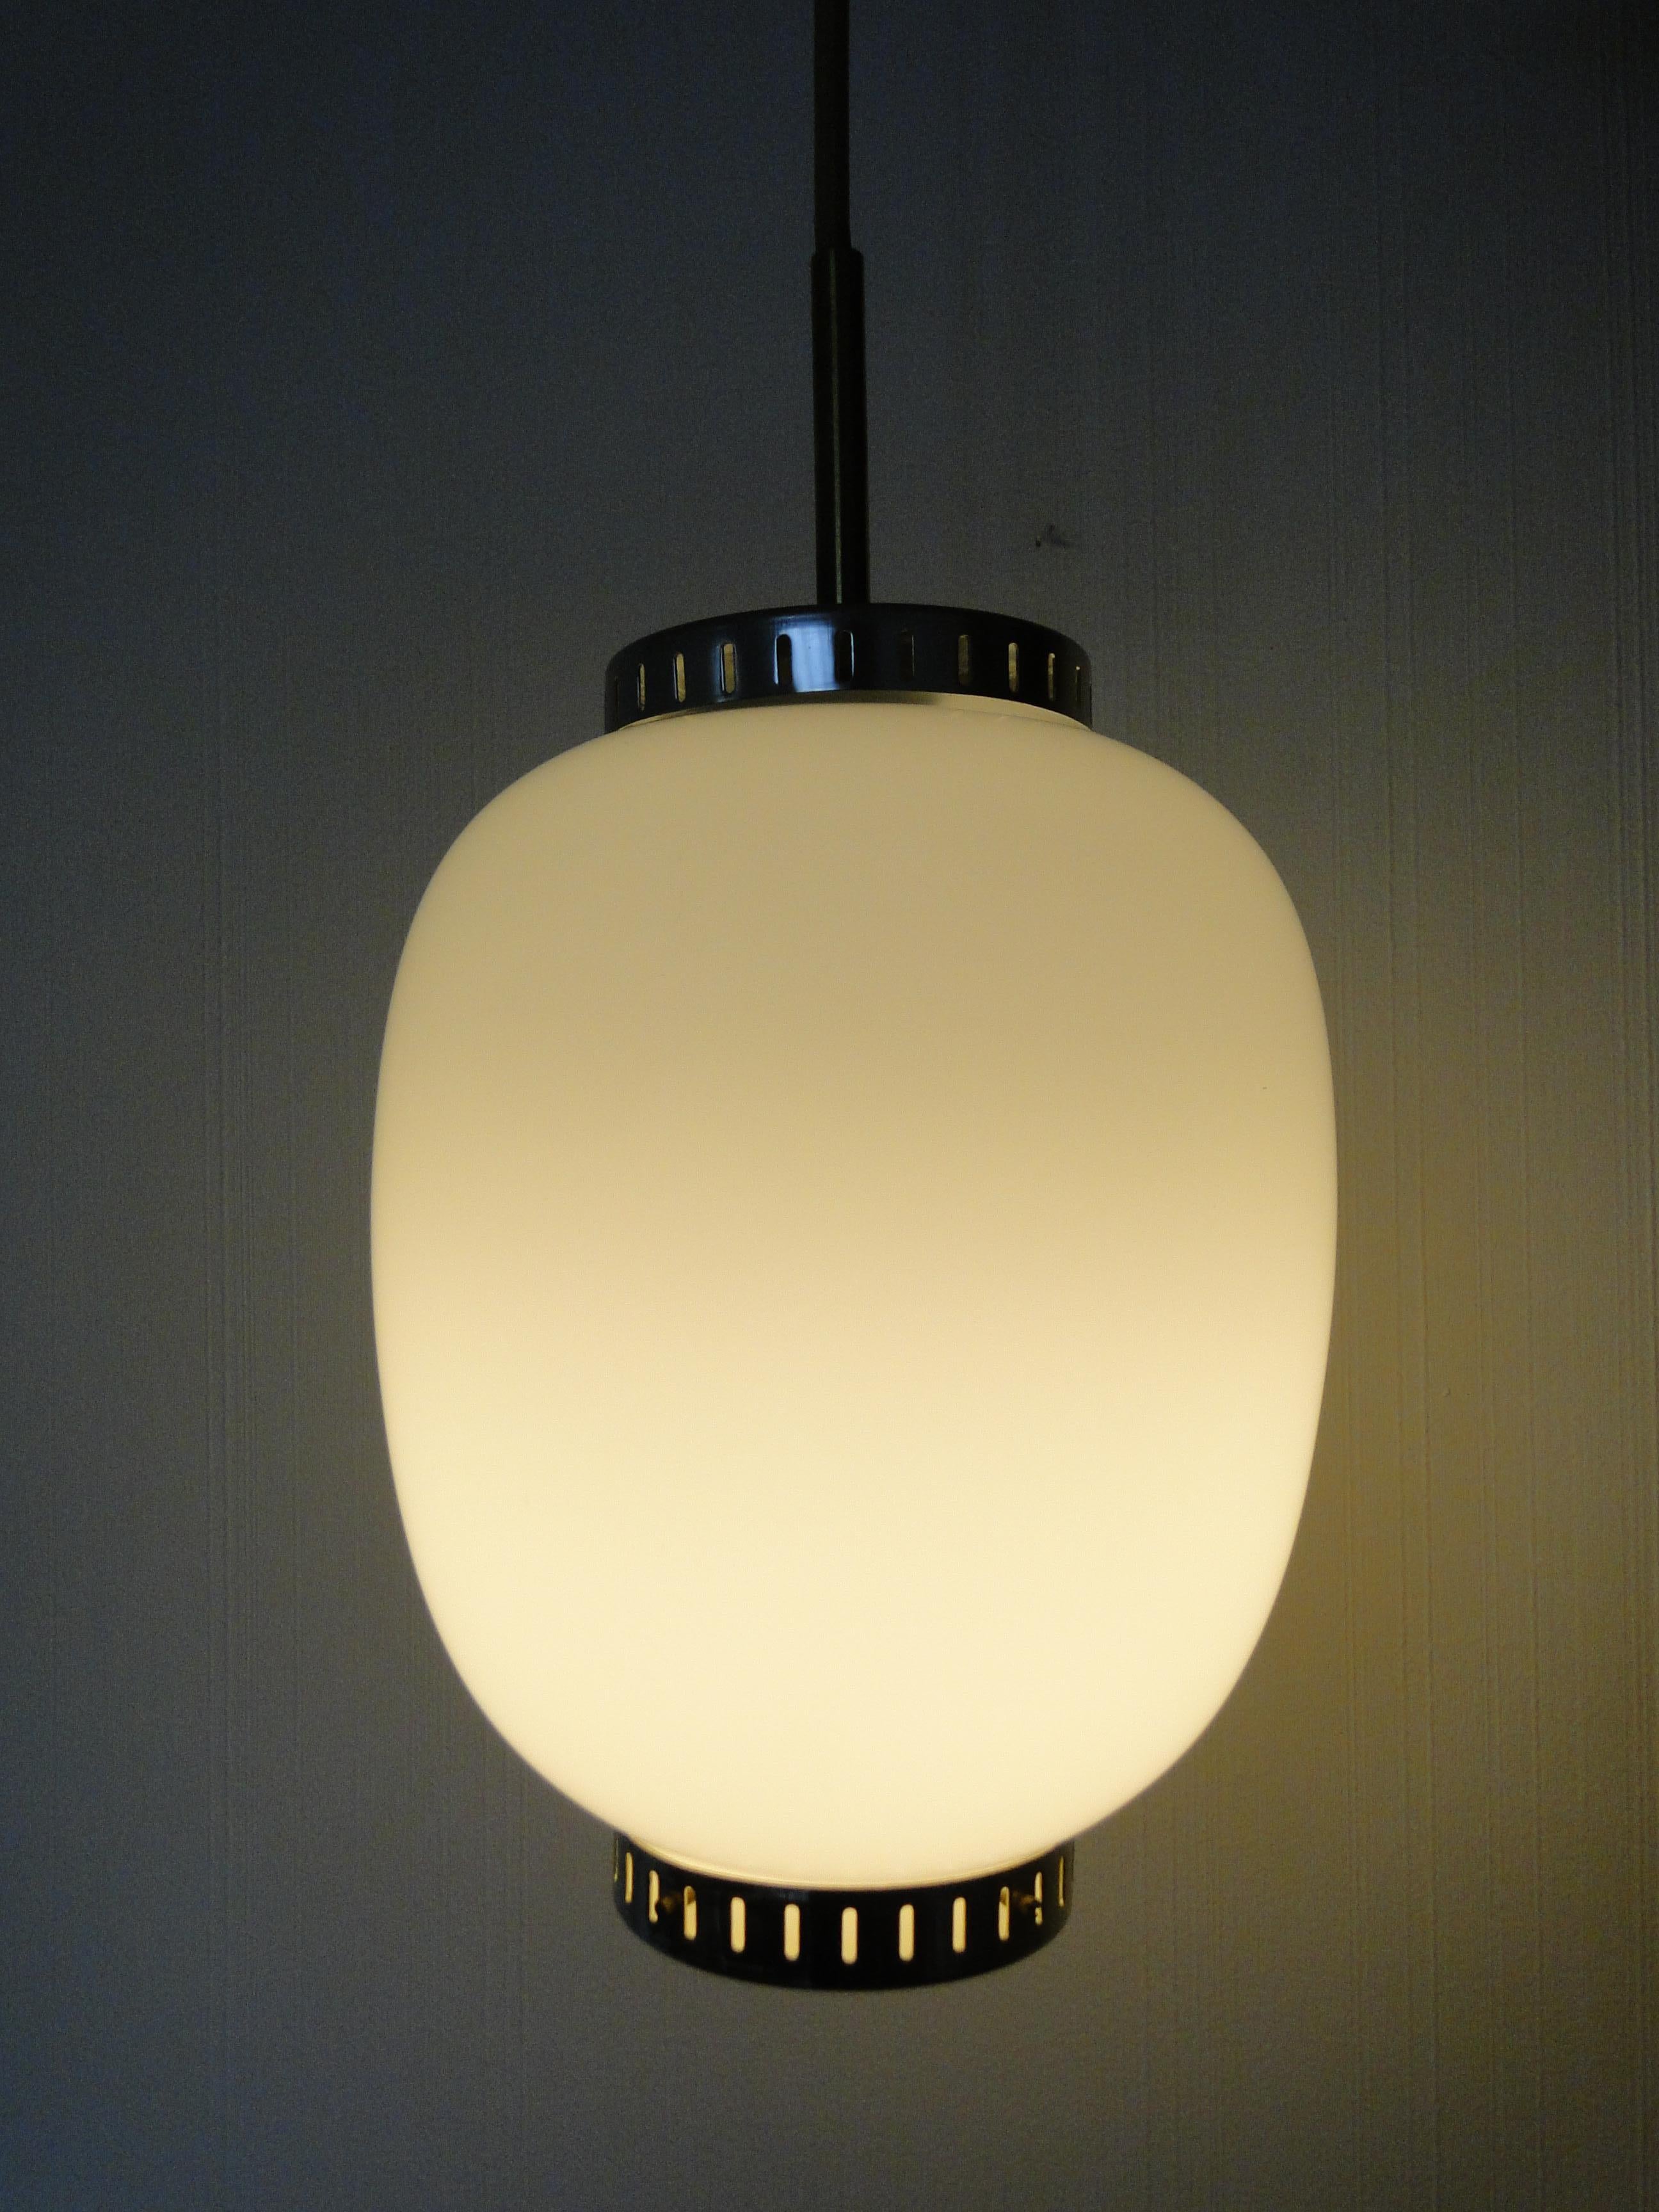 Bent Karlby. China lamp in white opal glass, silver brass mounting, frosted glass blind shade. 1960s. 

Produced by Lyfa. 

Good used condition.

E27 Bulb rewired and functional.